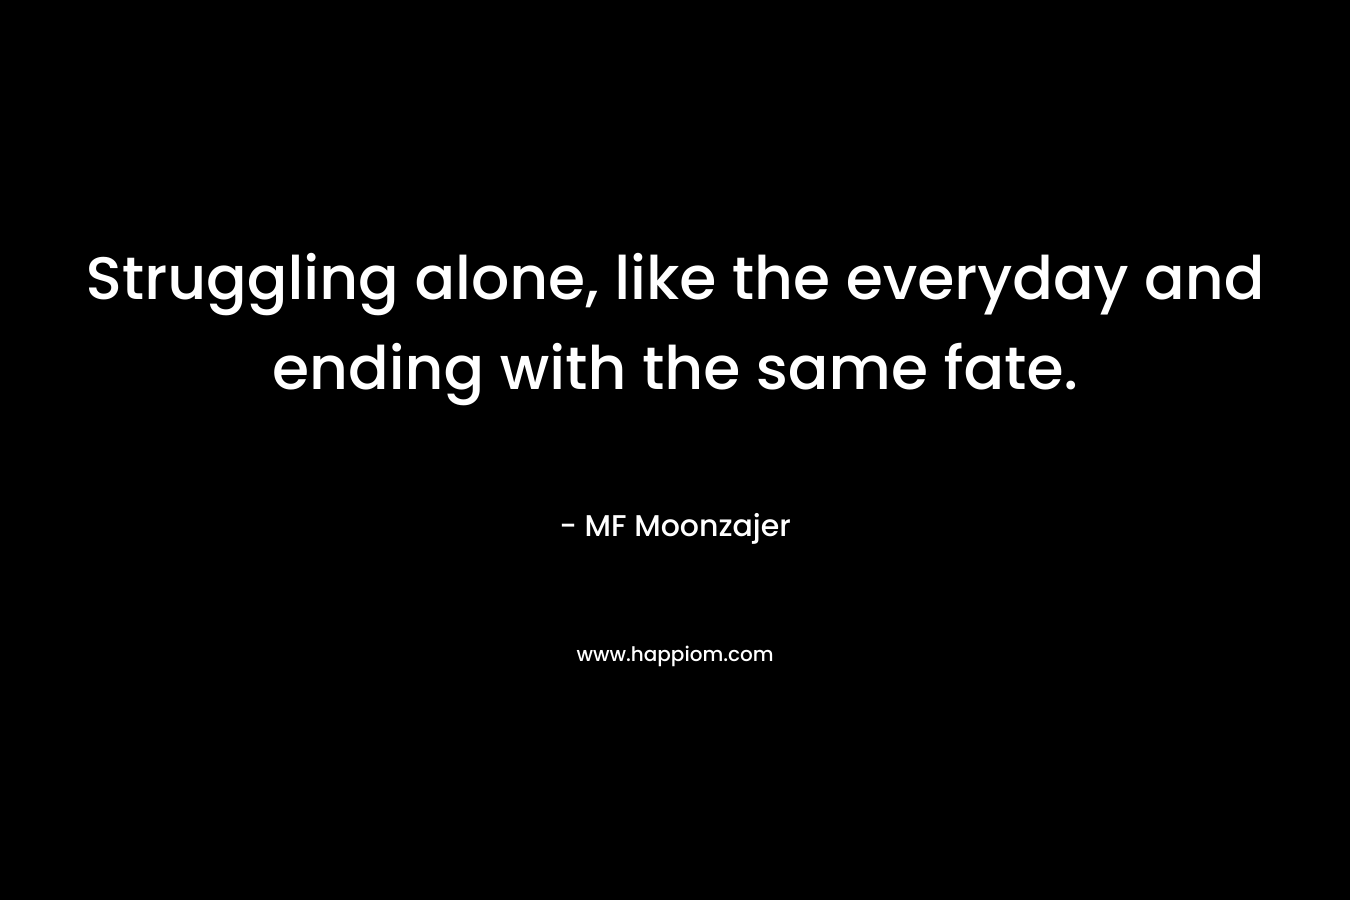 Struggling alone, like the everyday and ending with the same fate. – MF Moonzajer